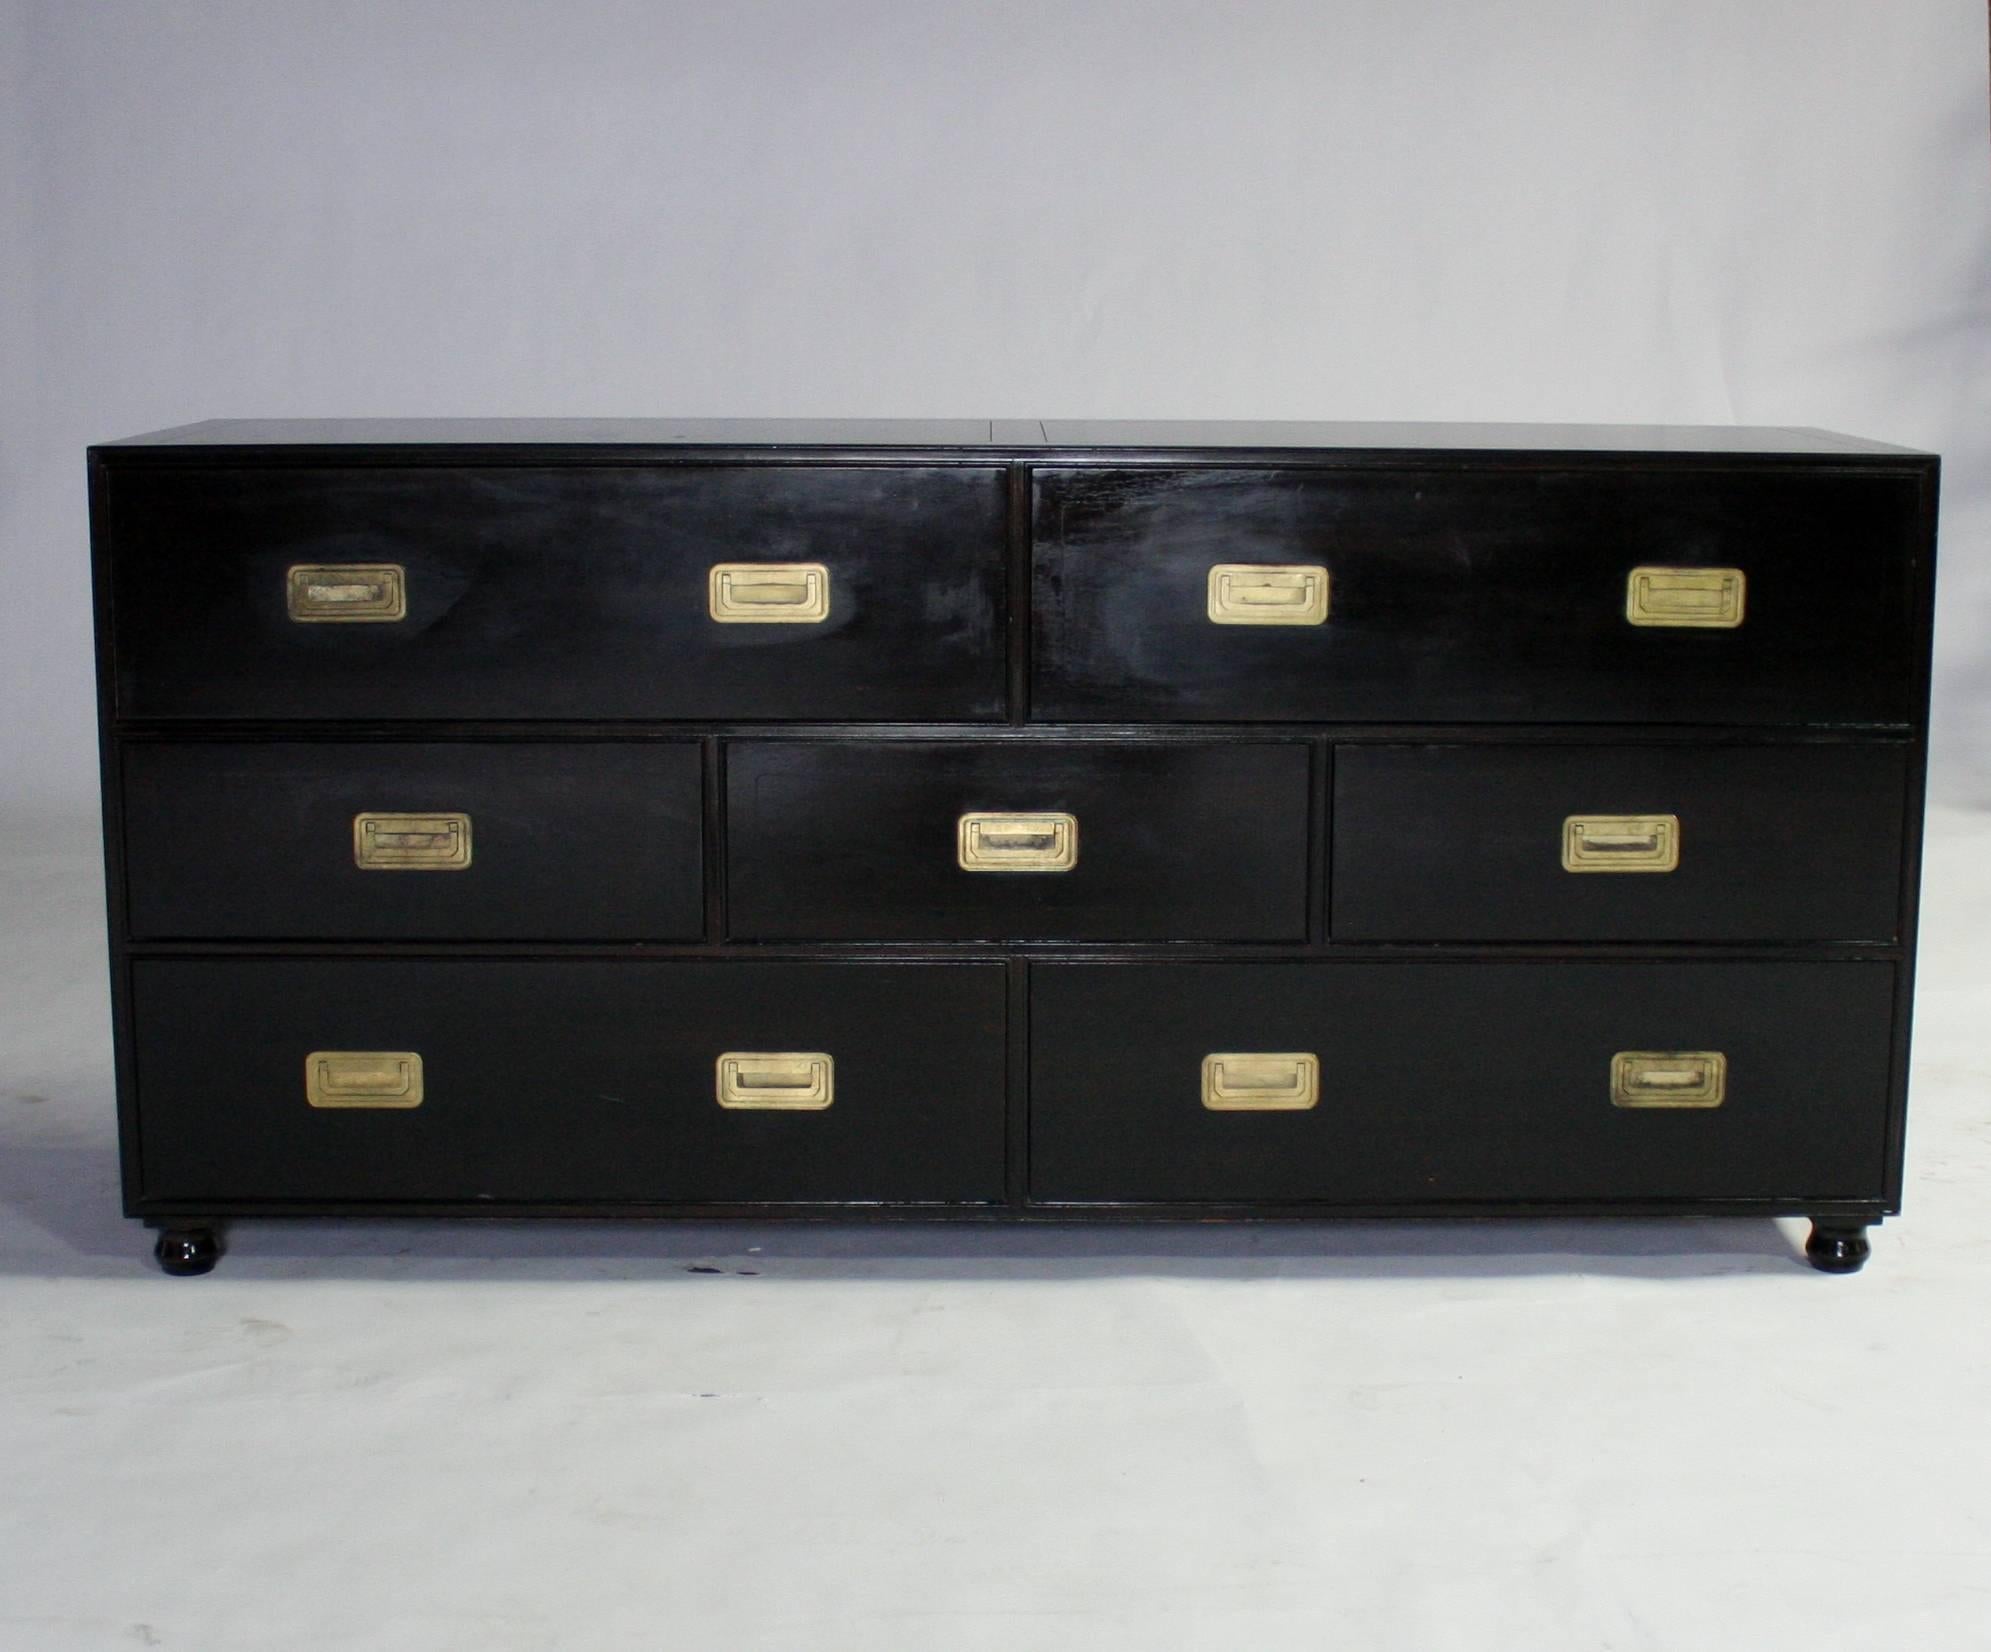 Handsome black lacquered Baker Campaign style dresser featuring seven drawers with elegant recessed brass pulls and ball-shaped feet. All drawers open smoothly and are clean. Metal label inside top drawer.